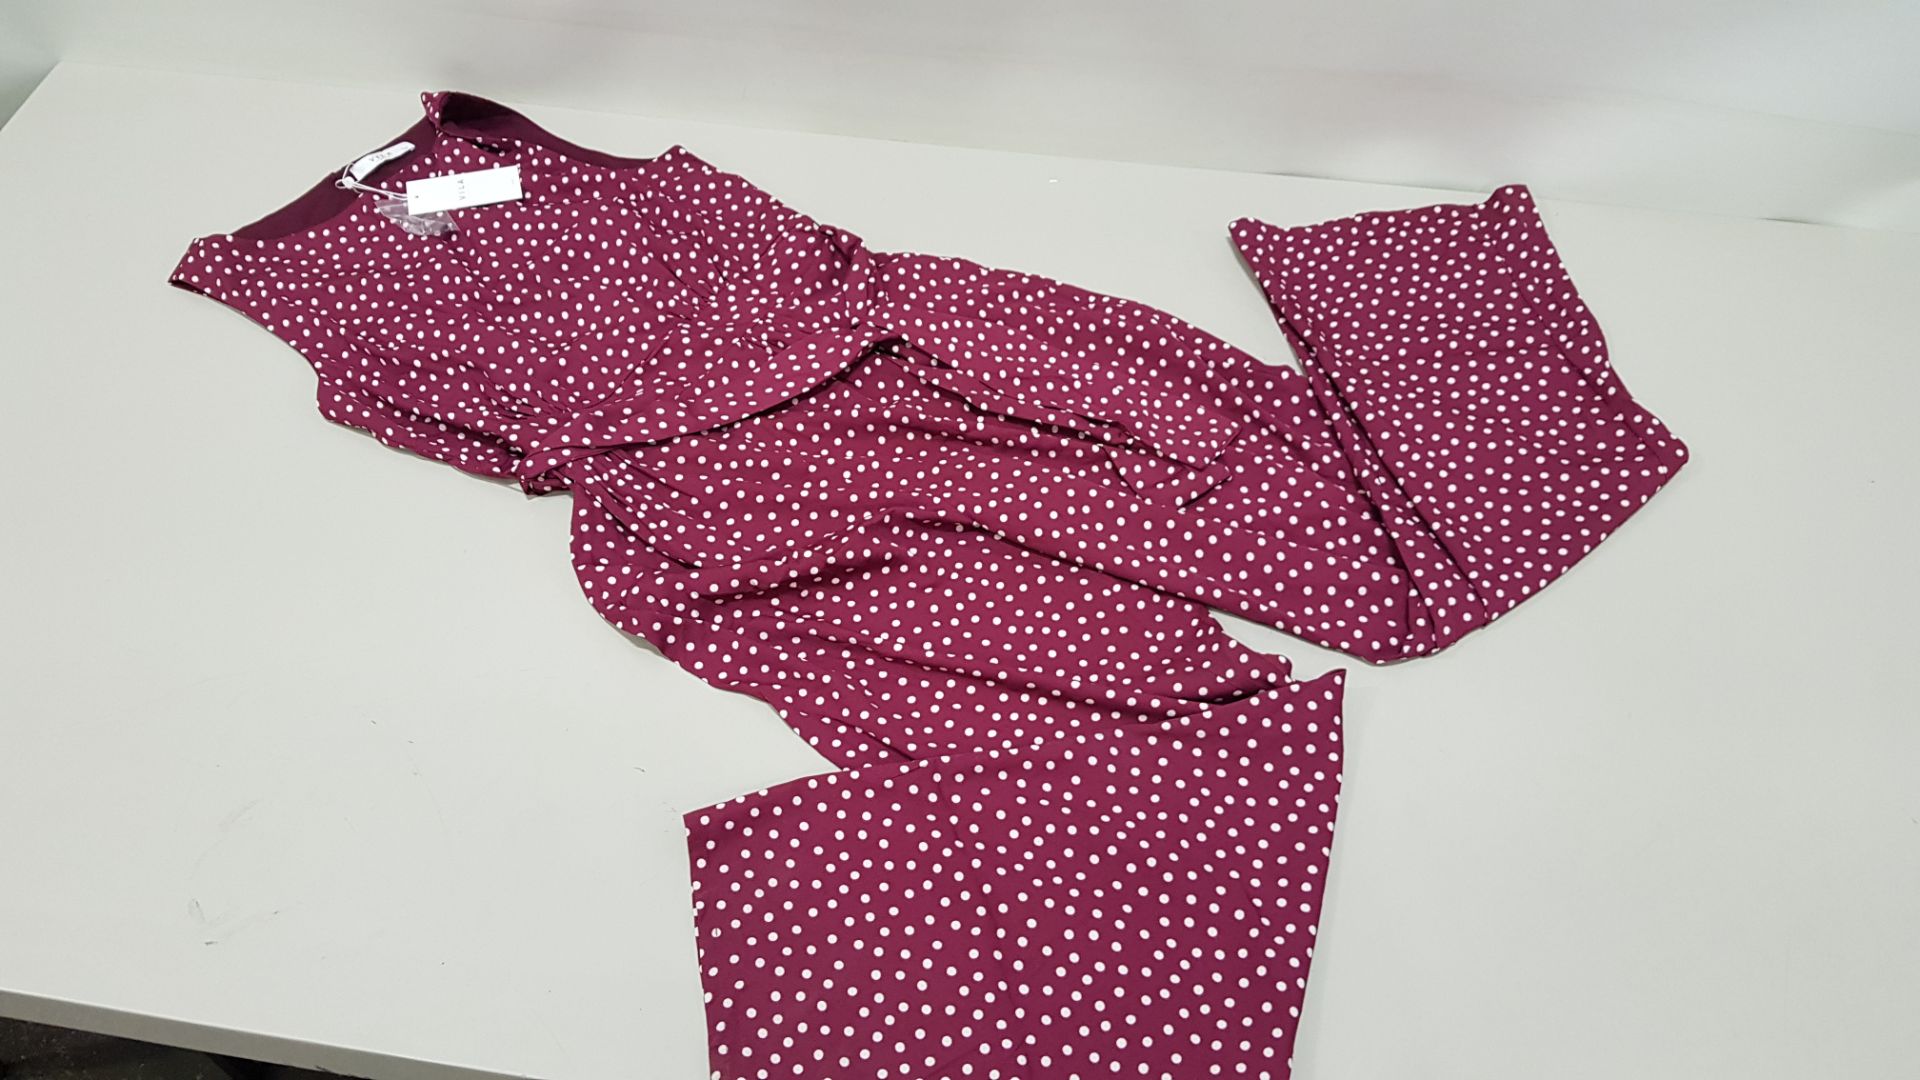 12 X BRAND NEW BOXED VILA CLOTHES VIMICKA PURPLE DOTTED JUMPSUIT IN RATIO PACKS ( 2 X 36, 3 X 38,